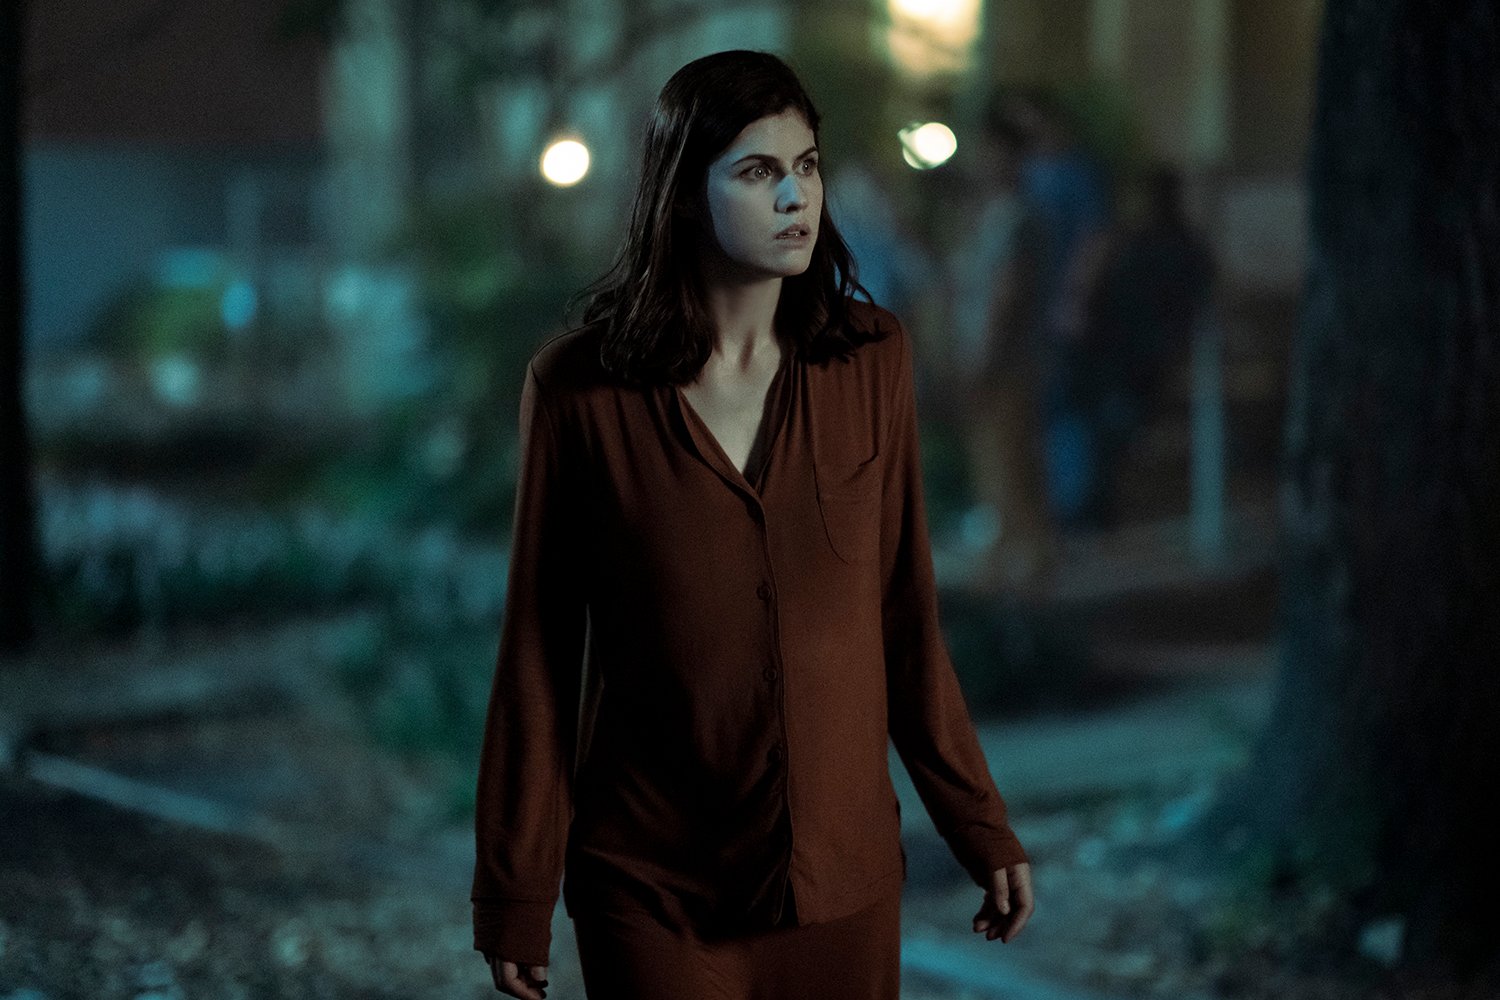 Alexandra Daddario as Rowan in Mayfair Witches, which could crossover with Interview With the Vampire